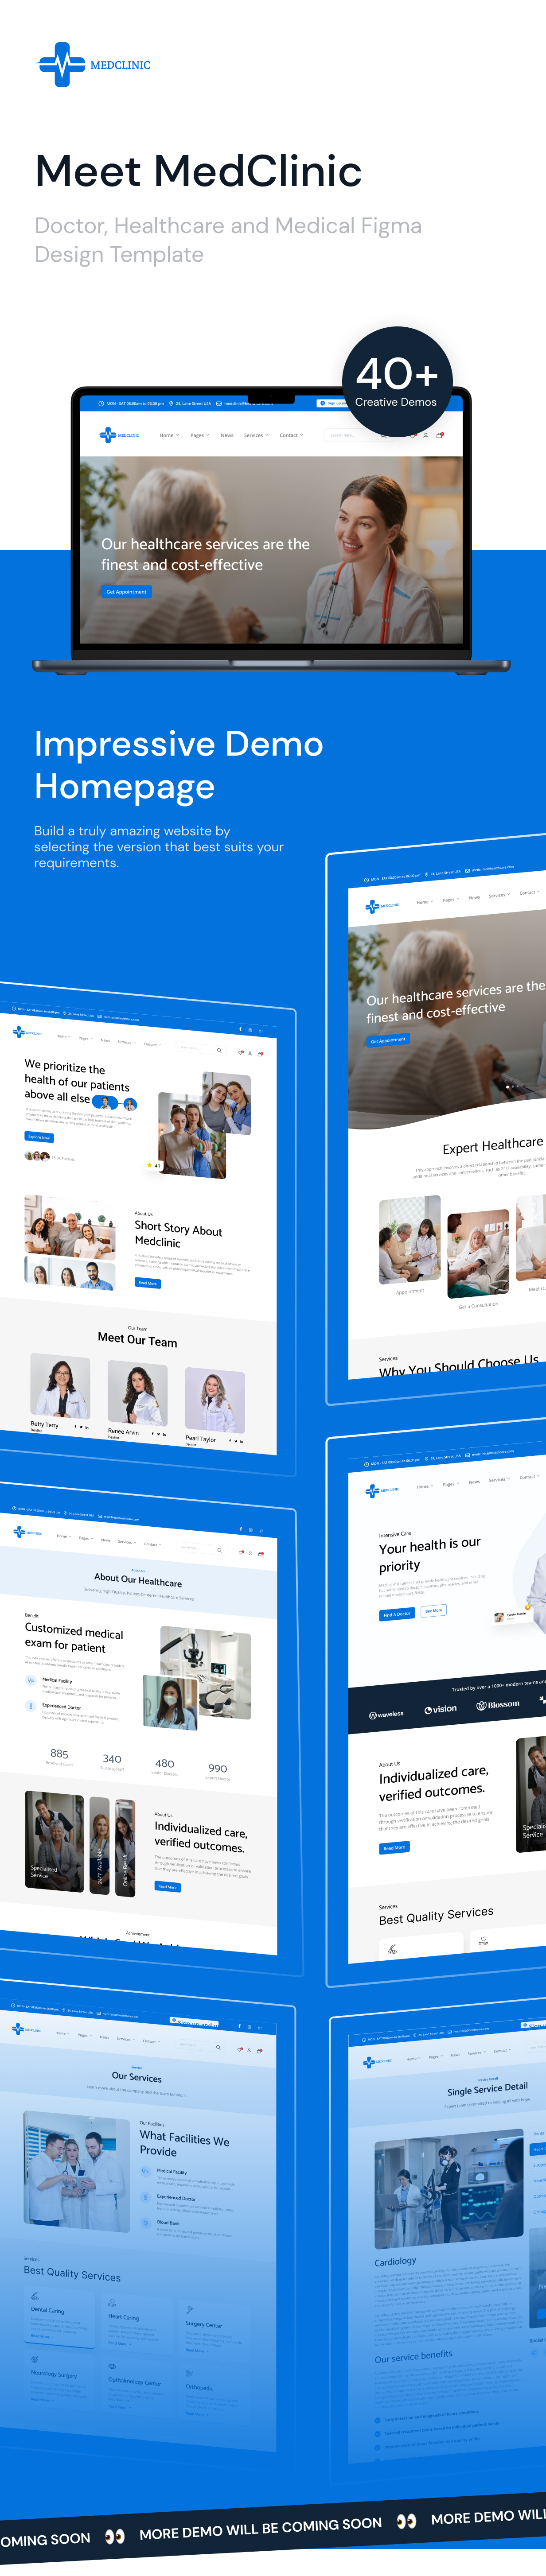 MedClinic - Doctor, Healthcare and Medical Figma Design Template - 1